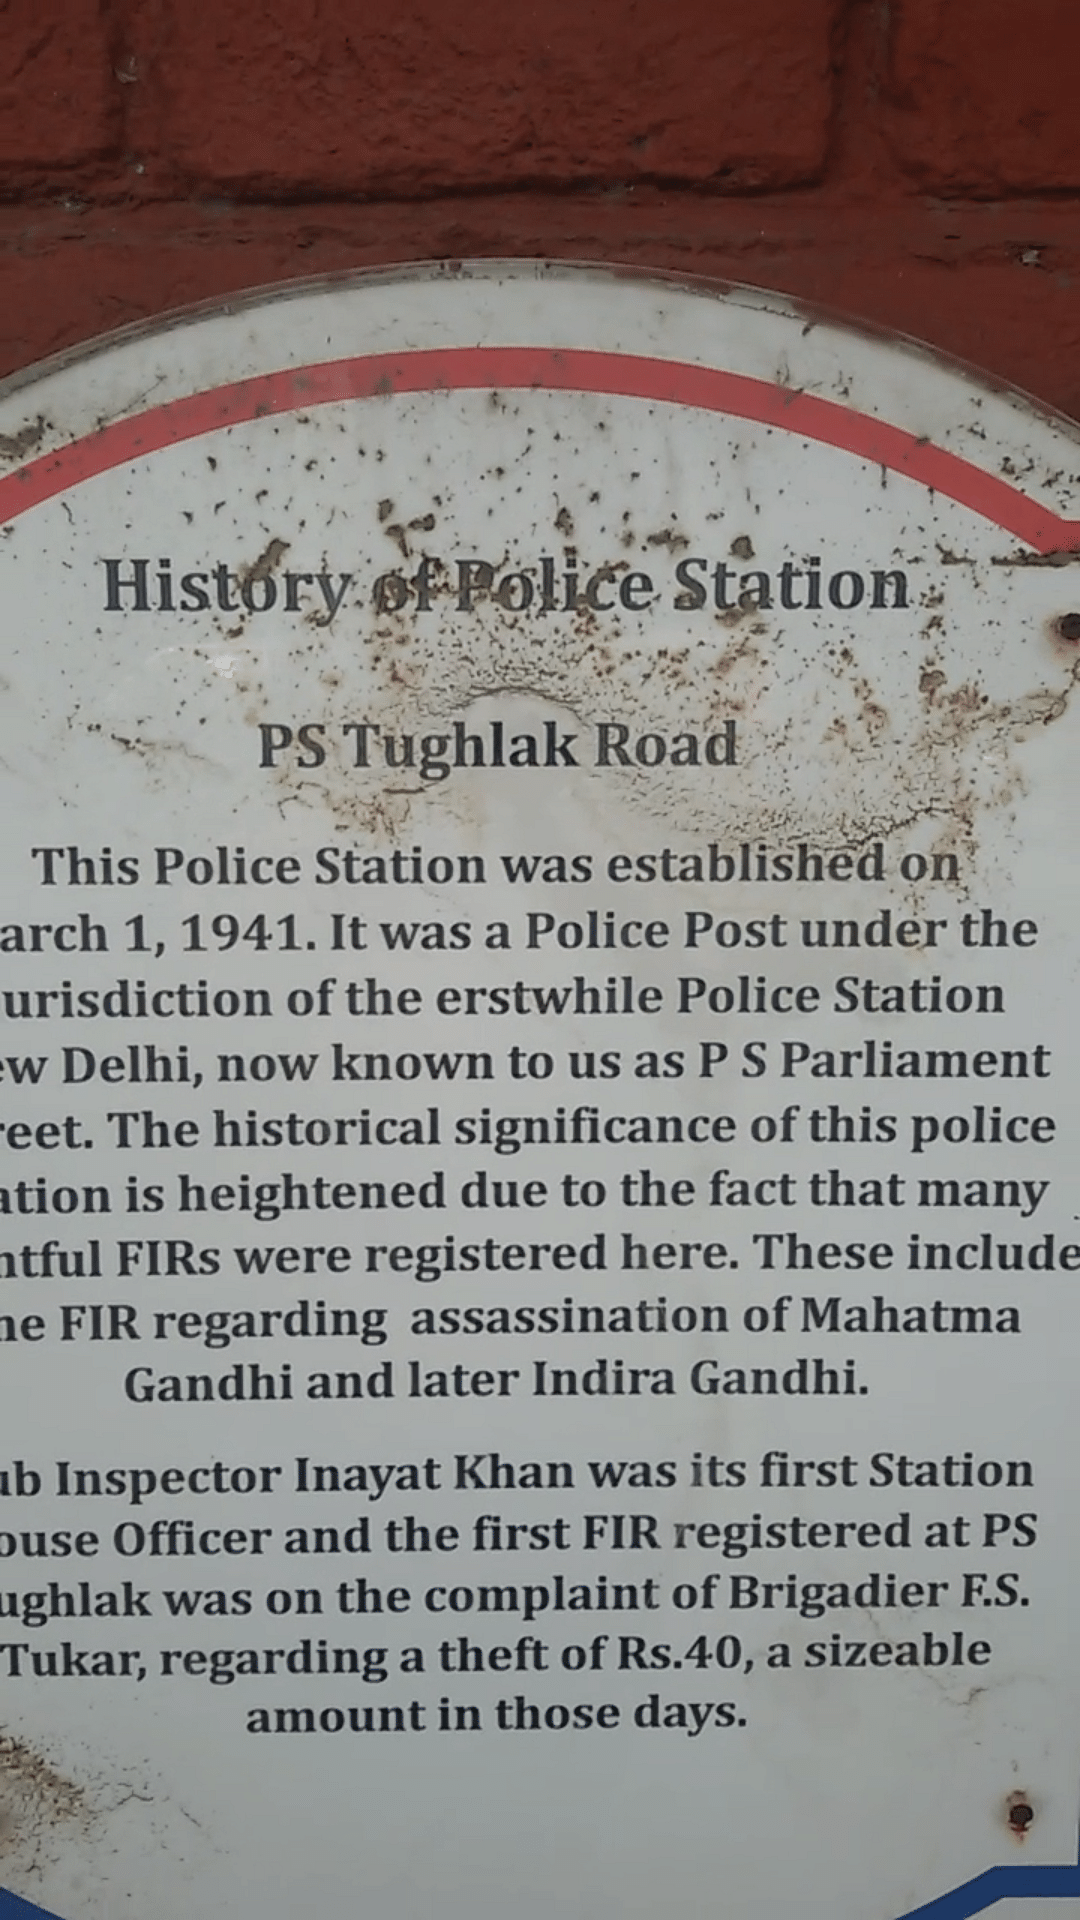  Tughlaq Road police station became an unfortunate  link between Indira and Mahtama Gandhi’s assassinations.